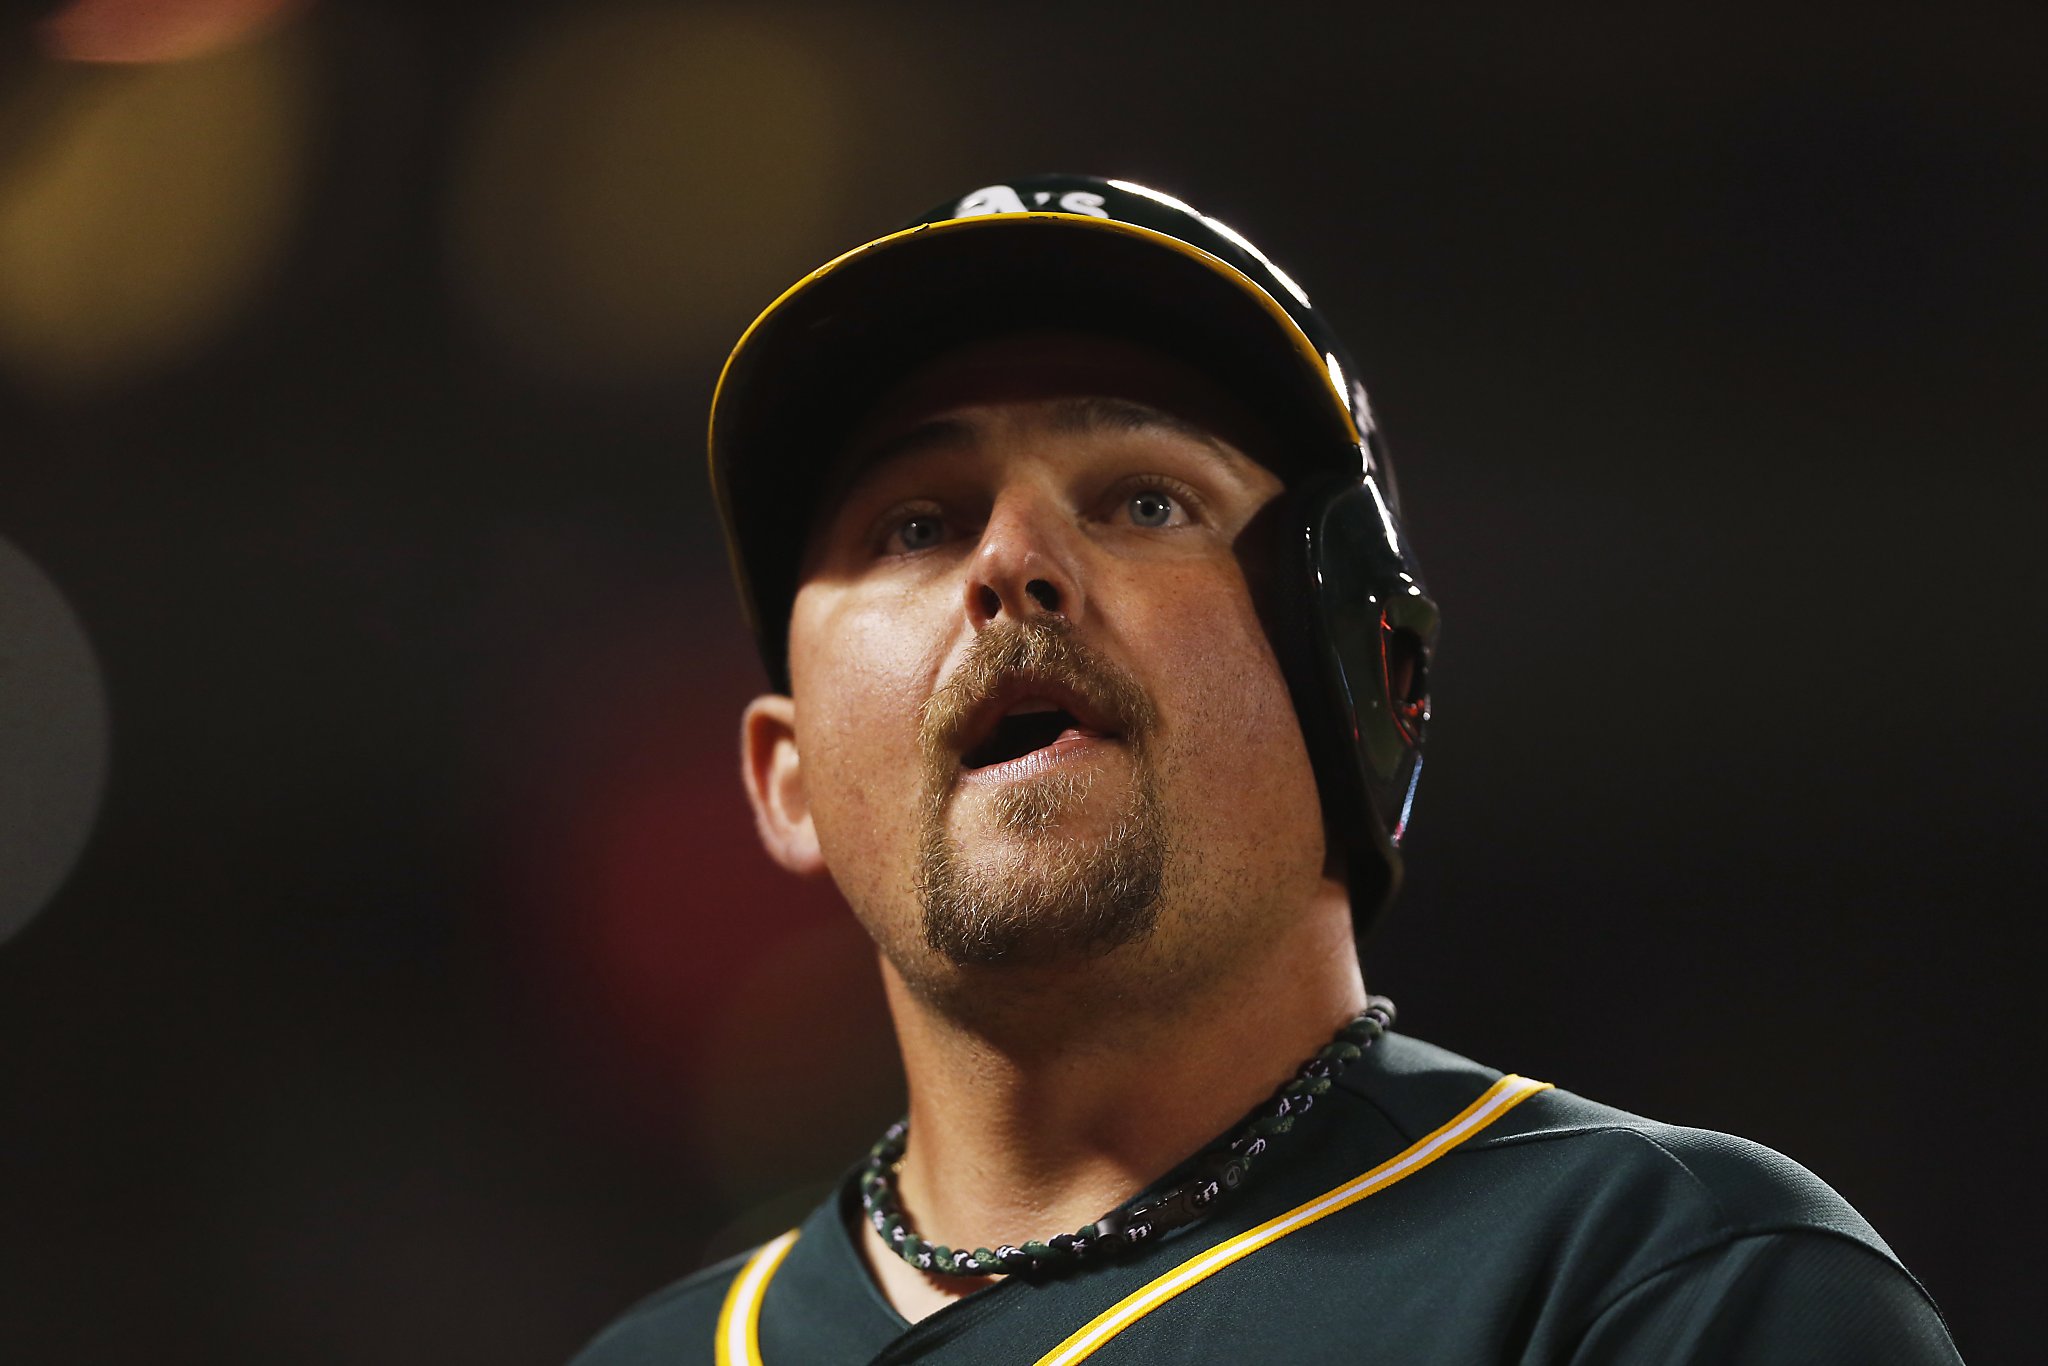 3 Ways the Oakland A's can get rid of Billy Butler before the 2016